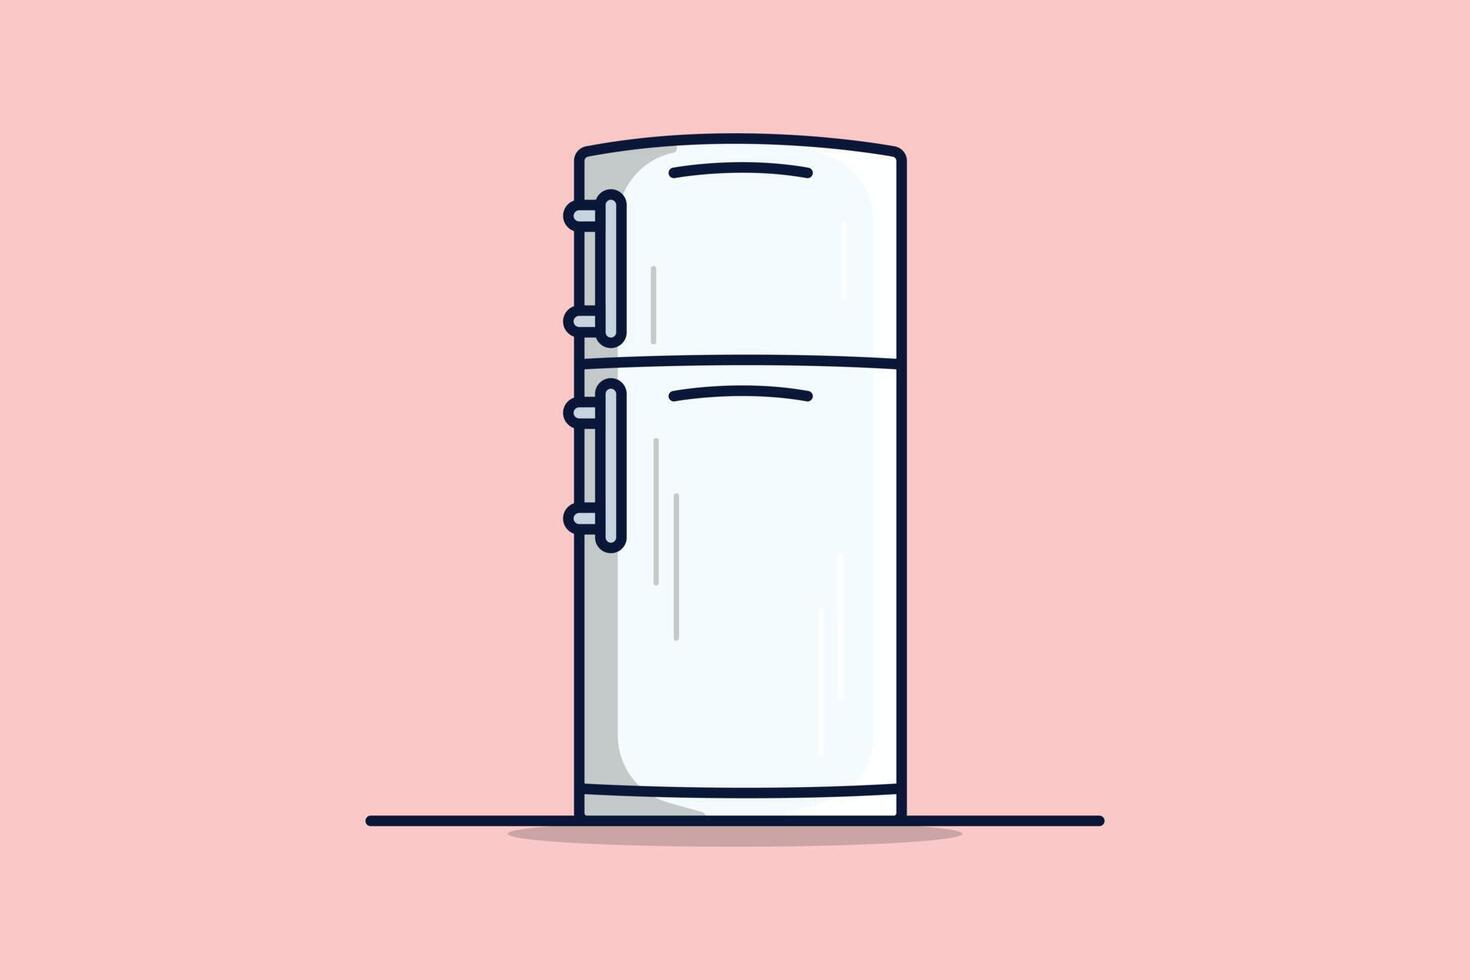 Modern Line Style Fridge vector illustration. Household technology object icon concept. House fridge freezer refrigerator vector illustration with shadow on pink background.